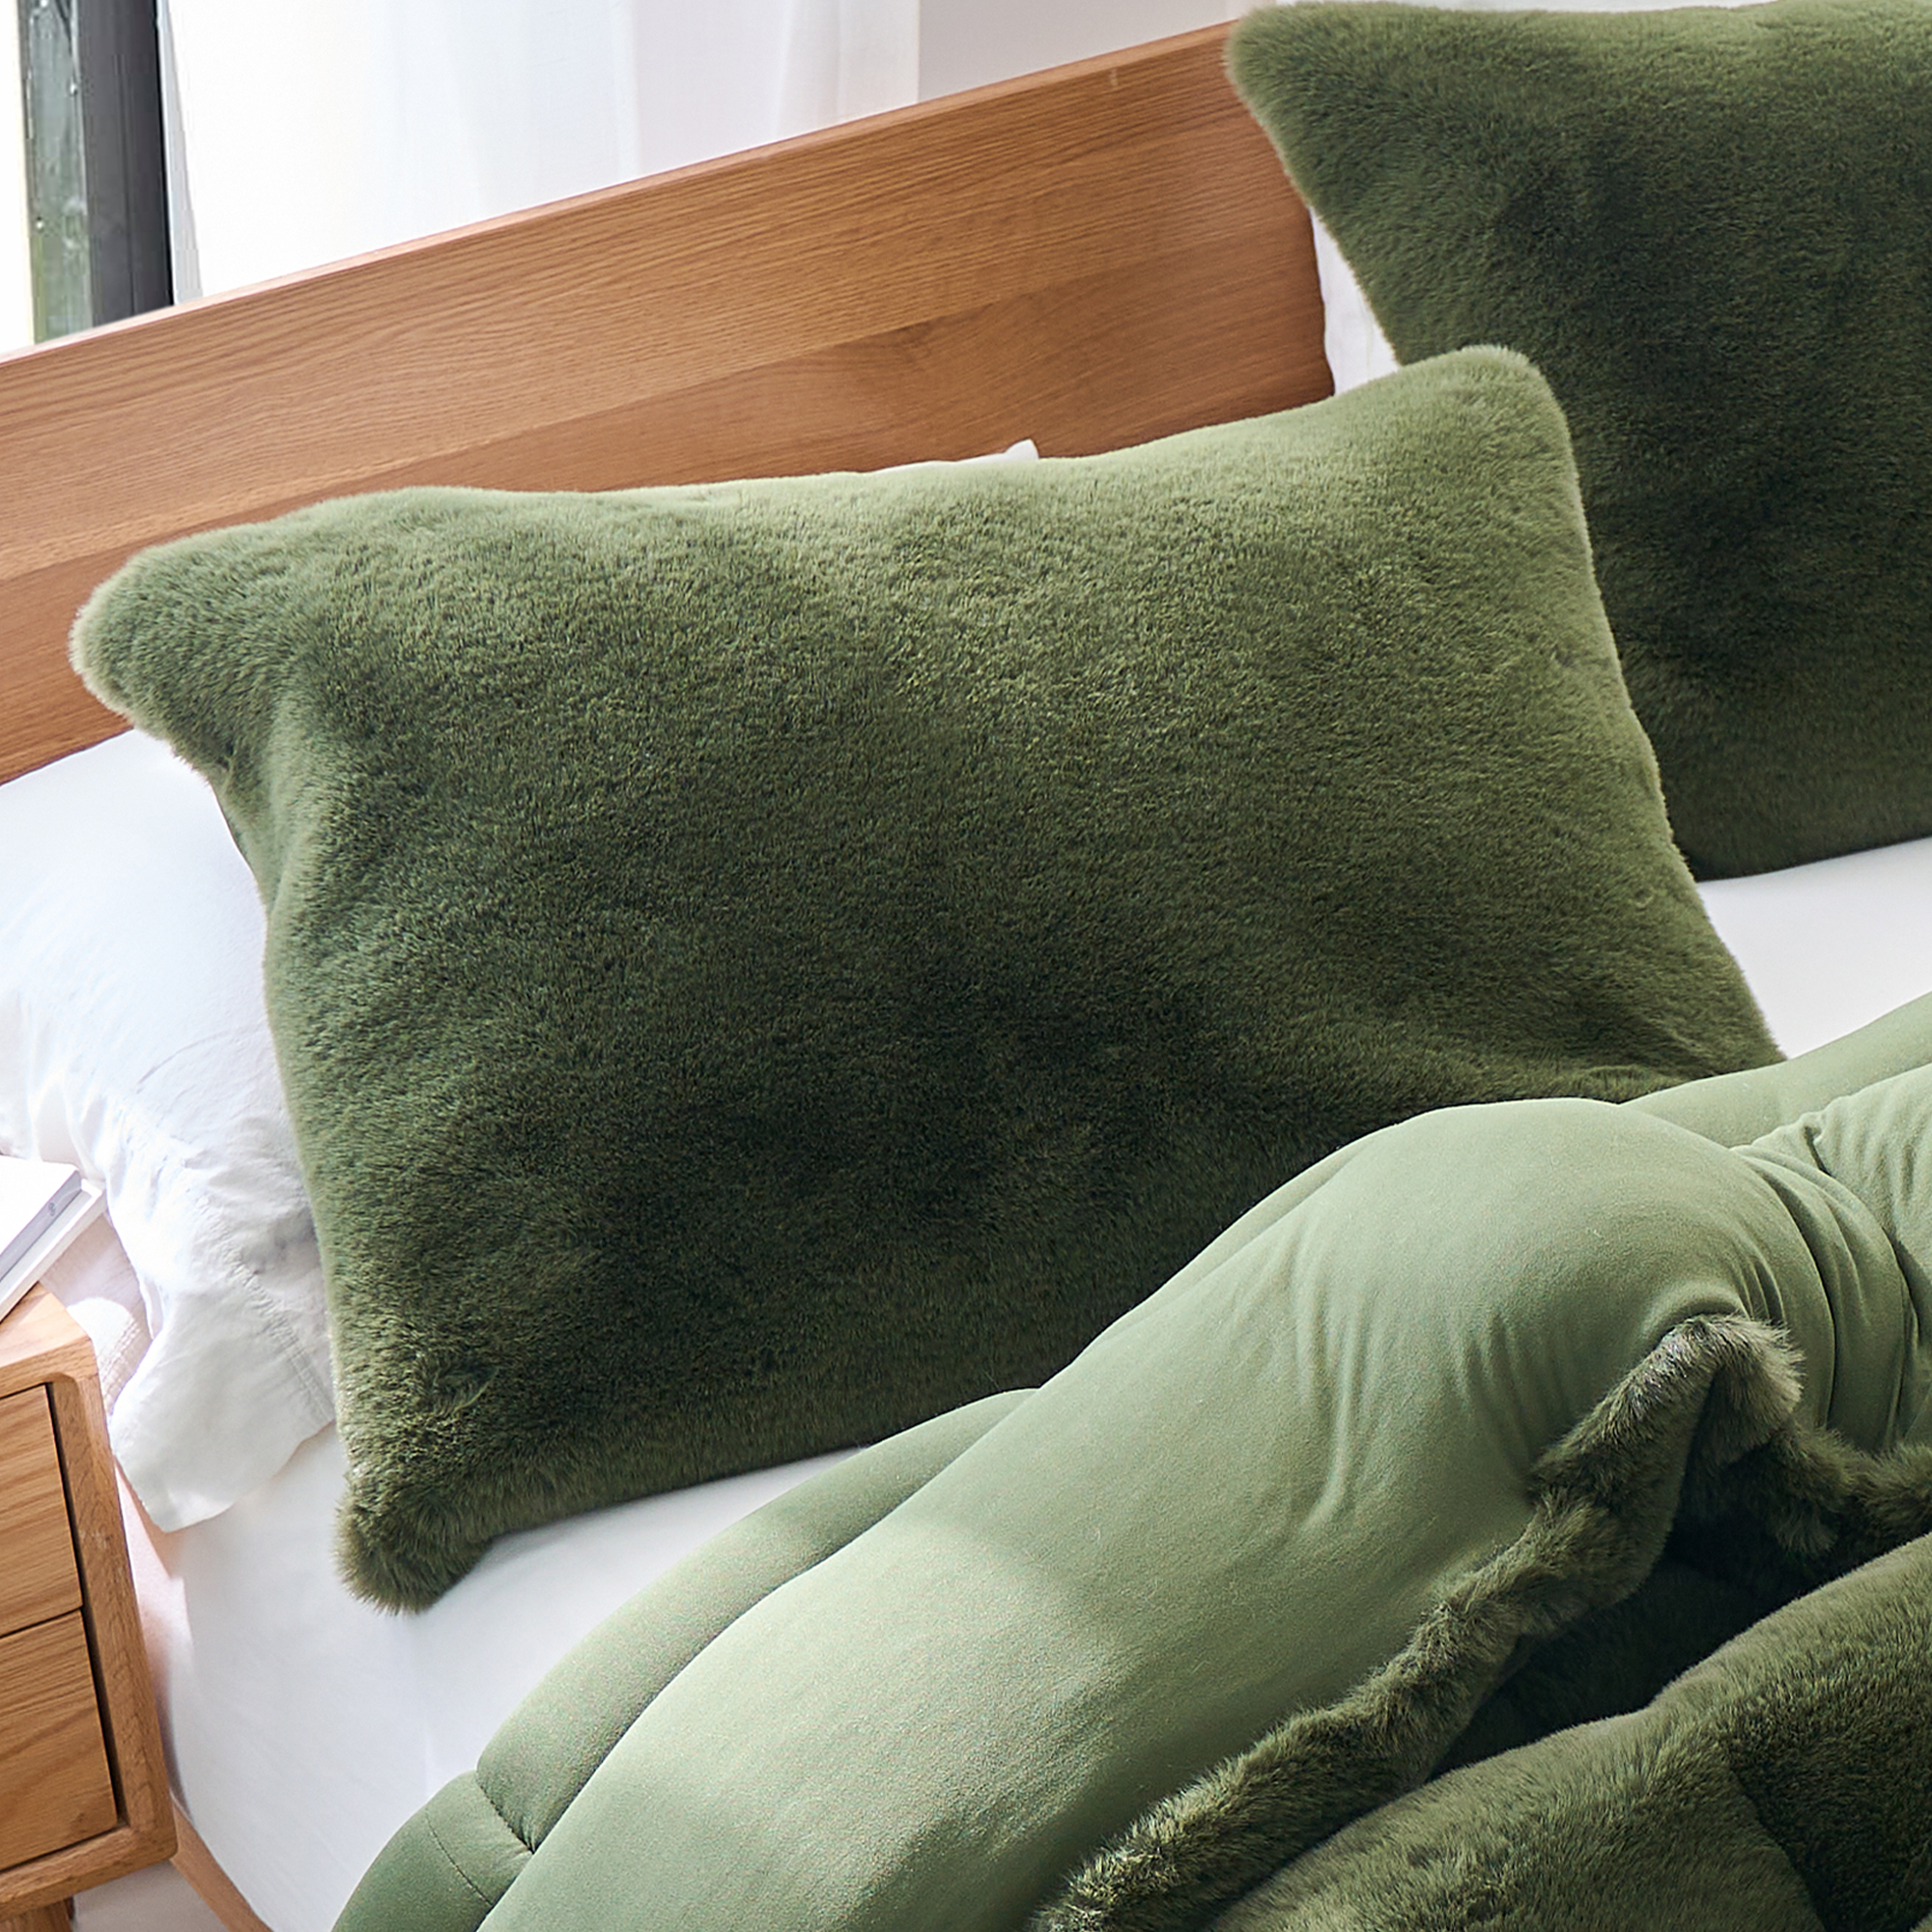 Stylish Chive Green Standard Pillow Sham Made with Soft Microfiber Fabric and Cozy Plush Bedding Materials